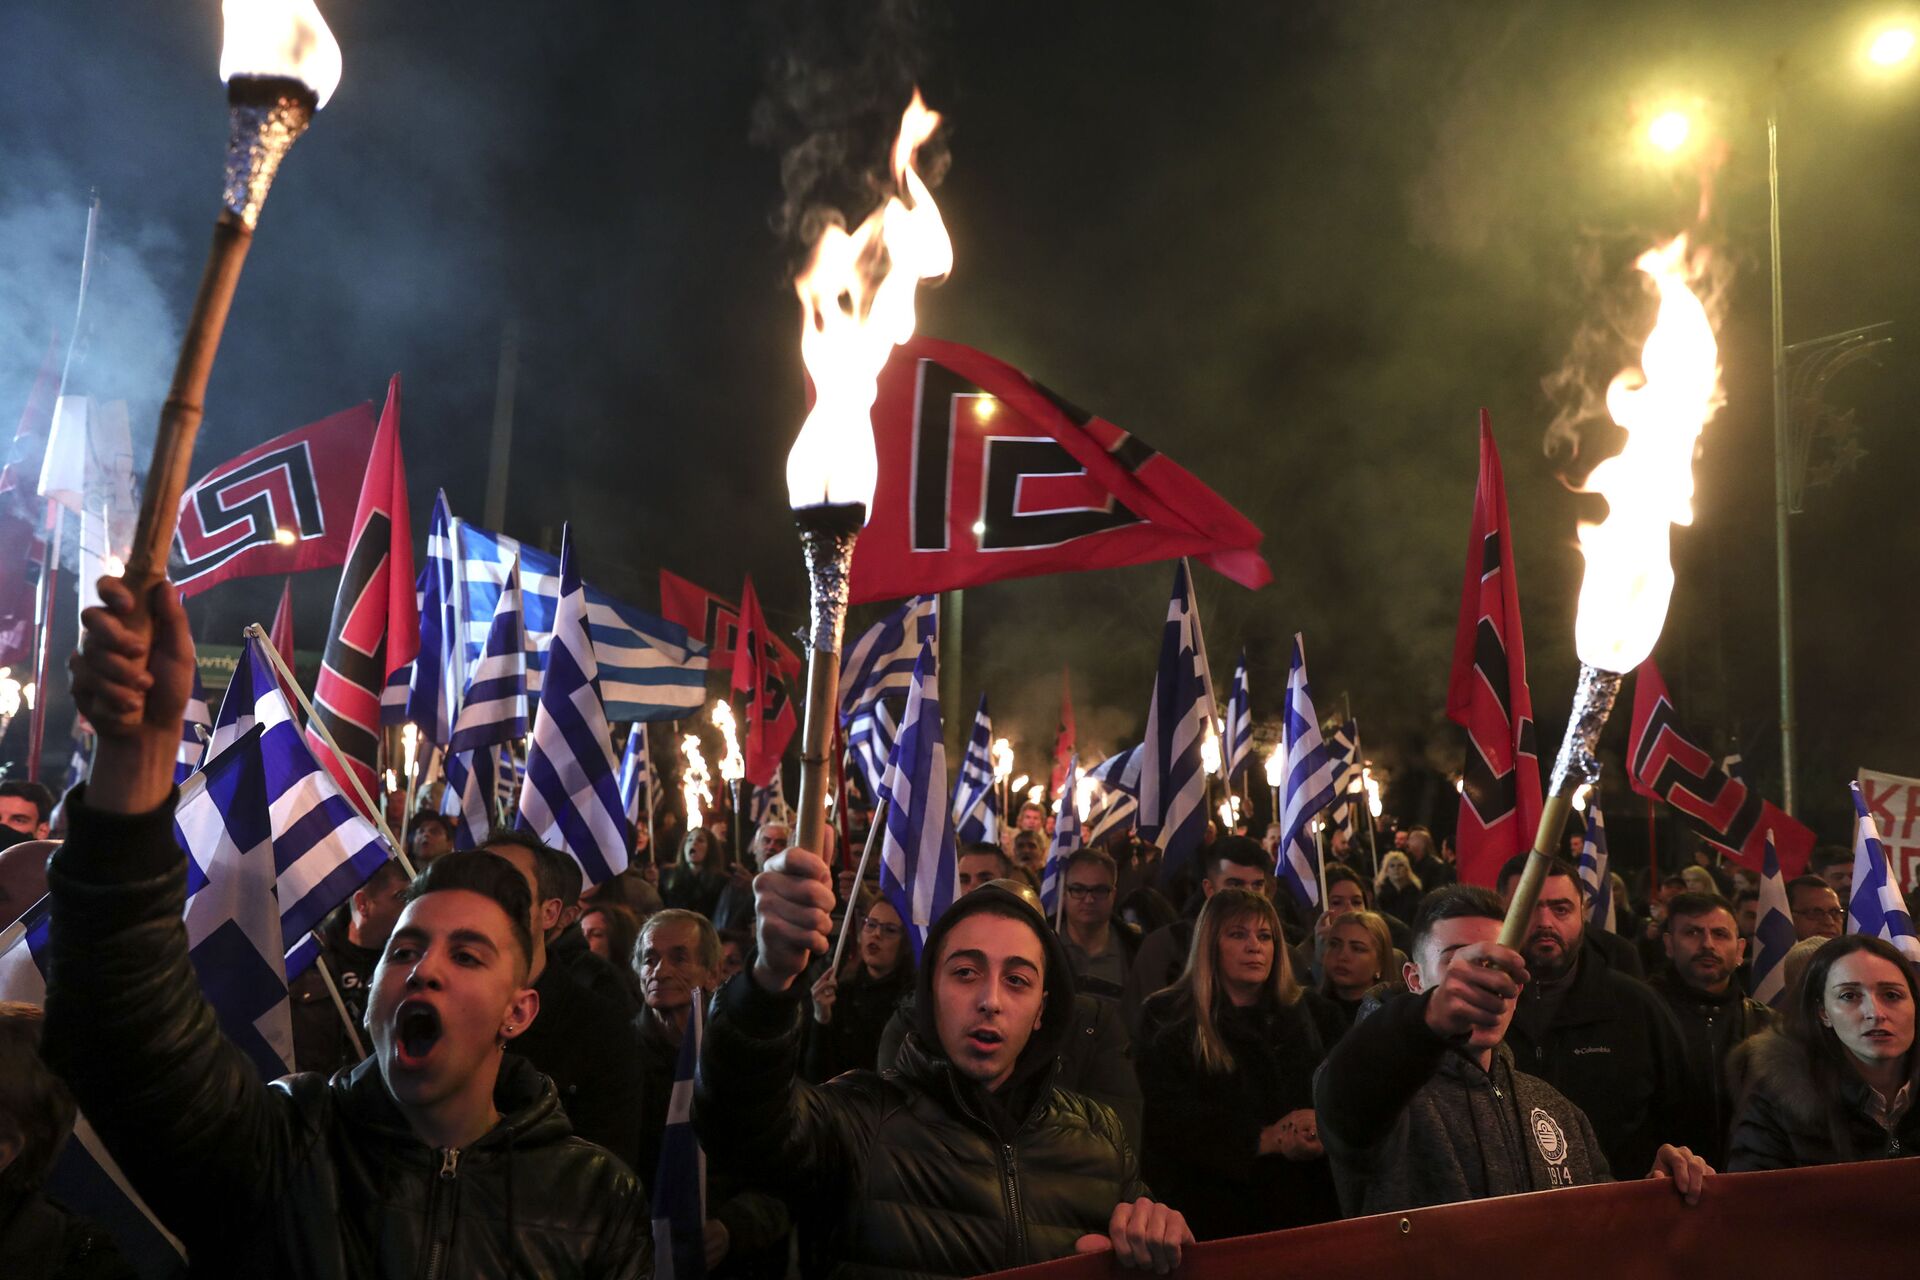 Supporters of Greece's extreme right Golden Dawn raise torches during a rally commemorating a 1996 military incident which cost the lives of three Greek navy officers and brought Greece and Turkey to the brink of war, in Athens, on Saturday, Feb. 2, 2019 - Sputnik International, 1920, 04.10.2021